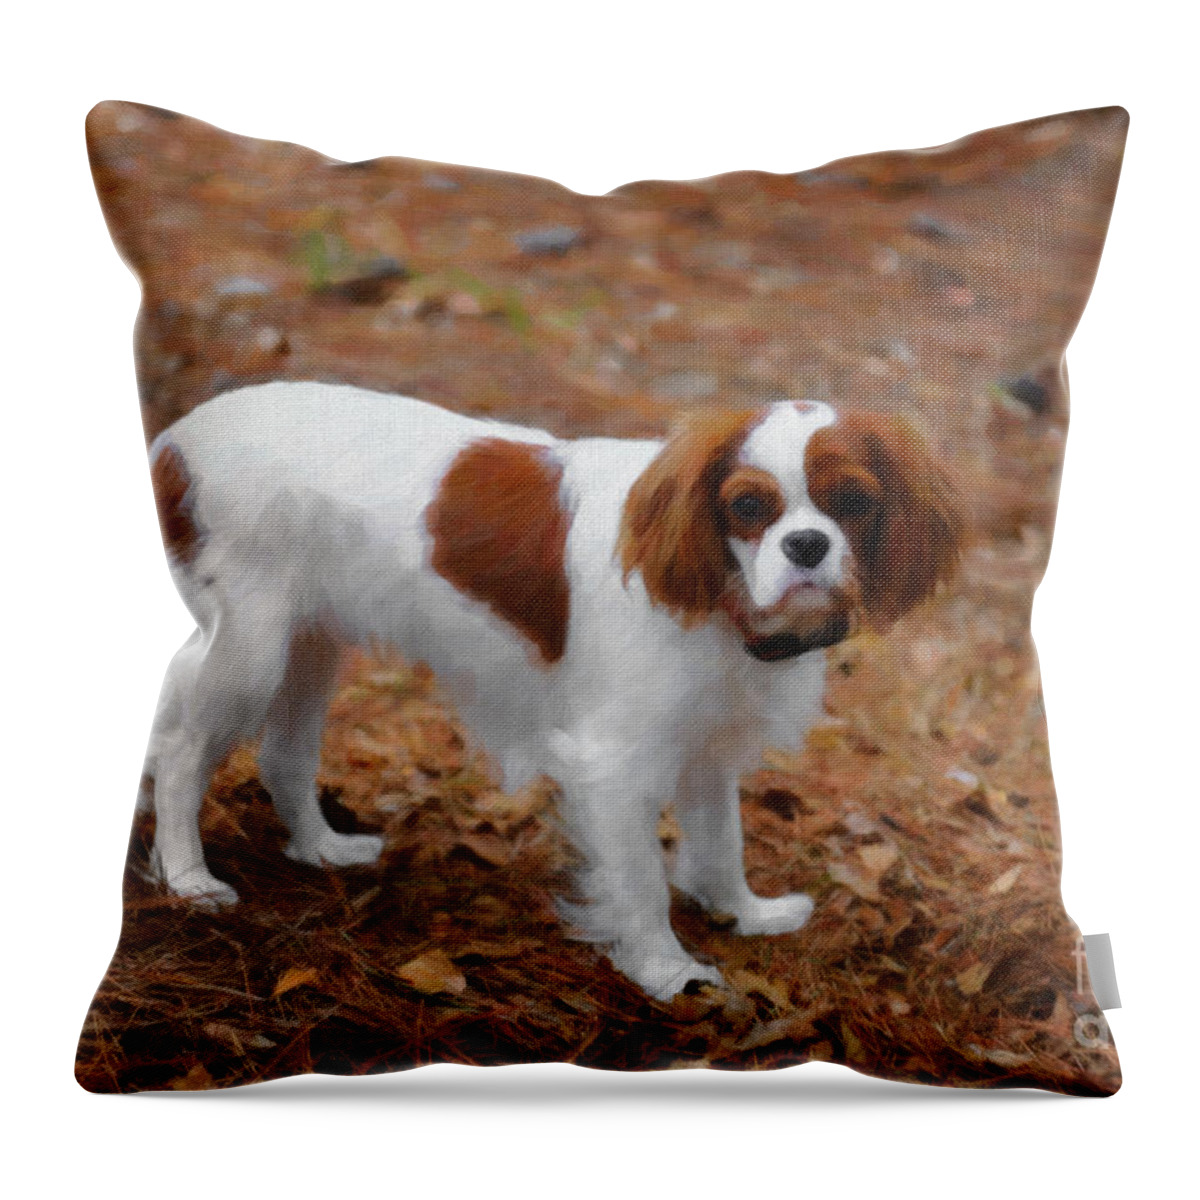 Cavalier King Charles Spaniel Throw Pillow featuring the digital art My Sweet Daisy by Dale Powell